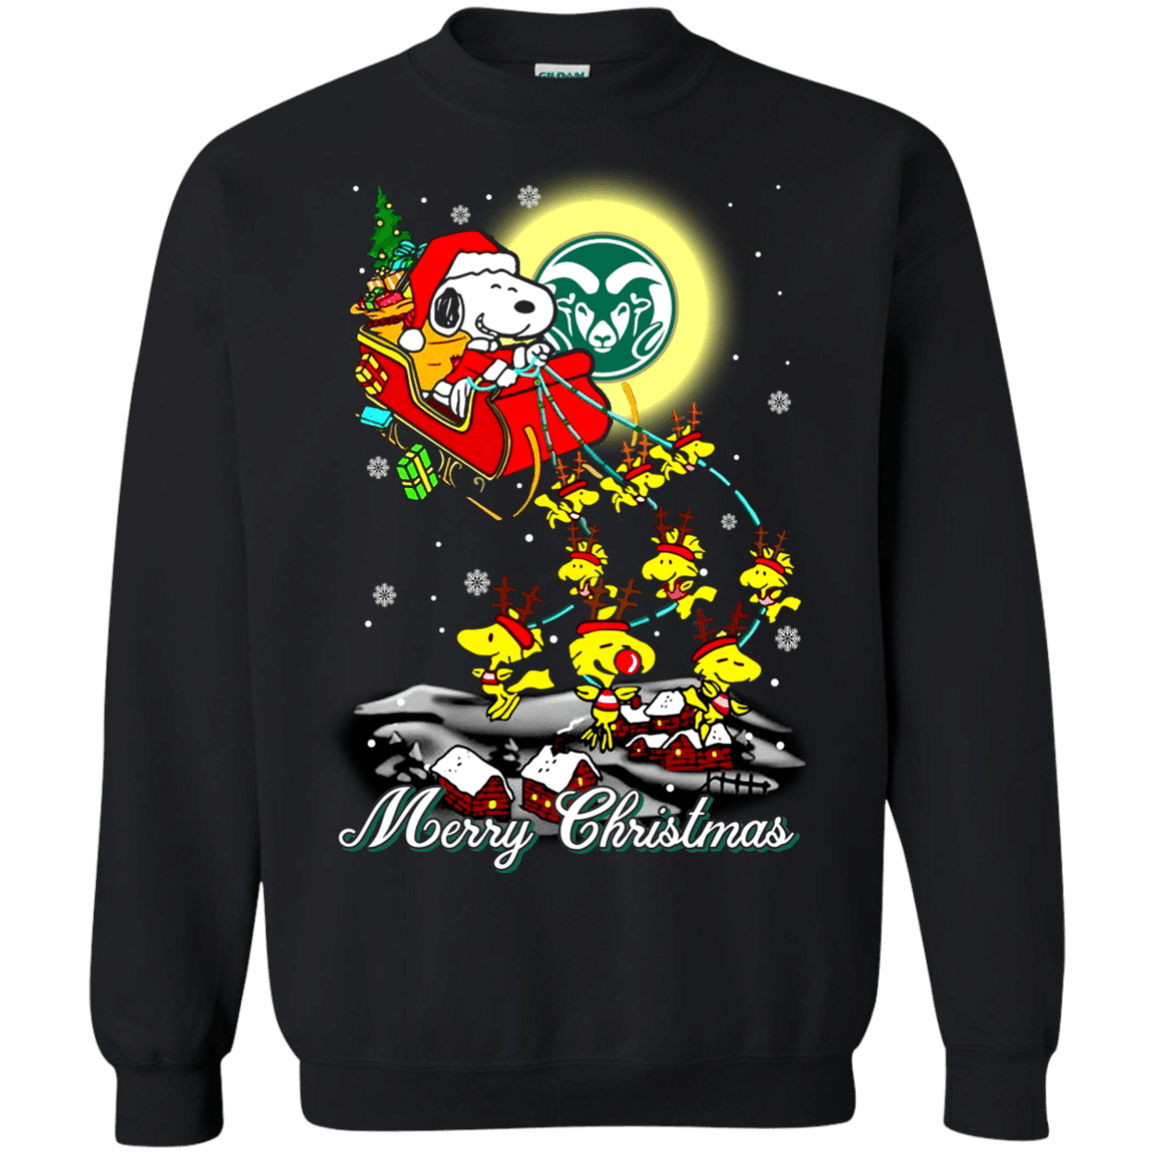 Trending Tees Colorado State Rams Ugly Christmas Sweaters Santa Claus With Sleigh And Snoopy Sweatshirts